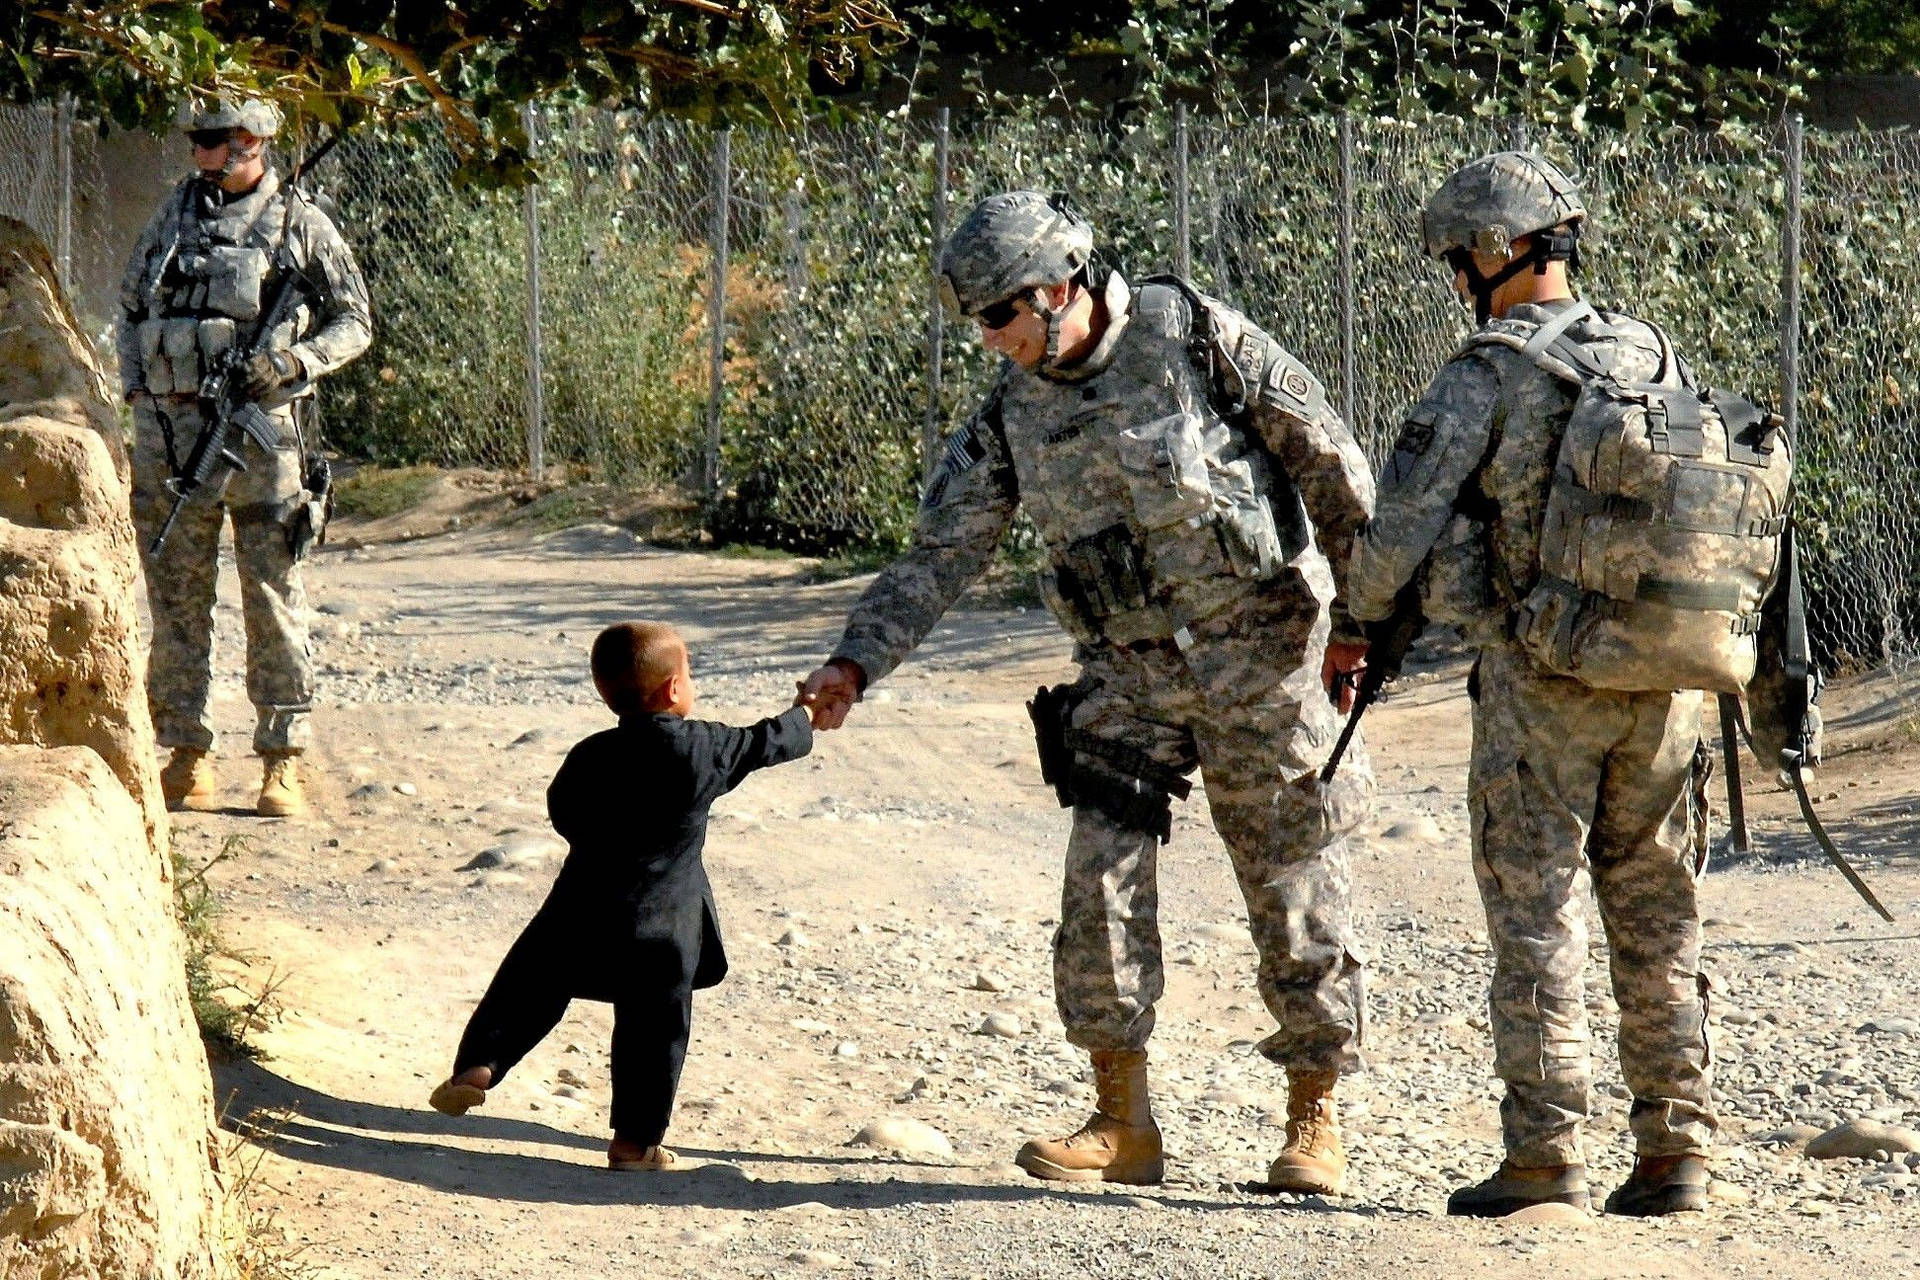 Us Army Shaking Boys Hand Background